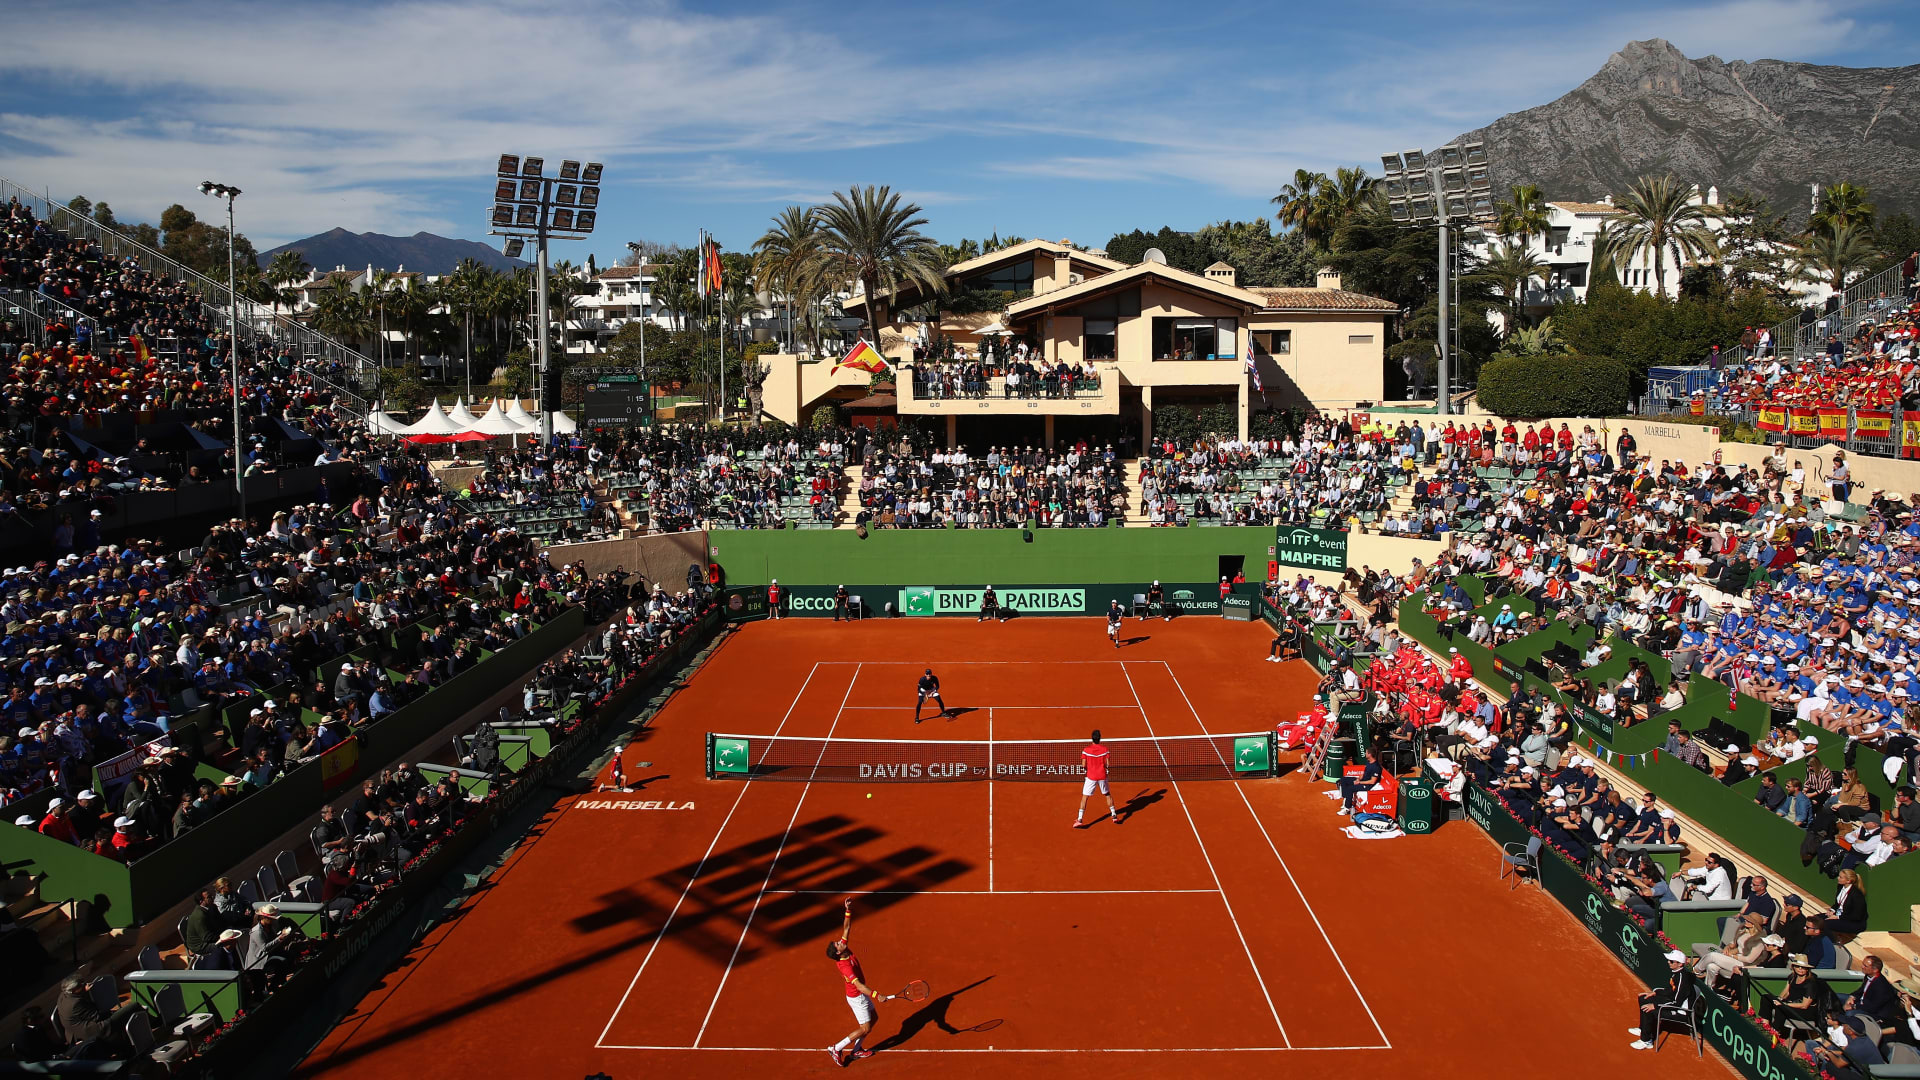 Spanish city of Malaga to host Davis Cup Finals in 2022-23